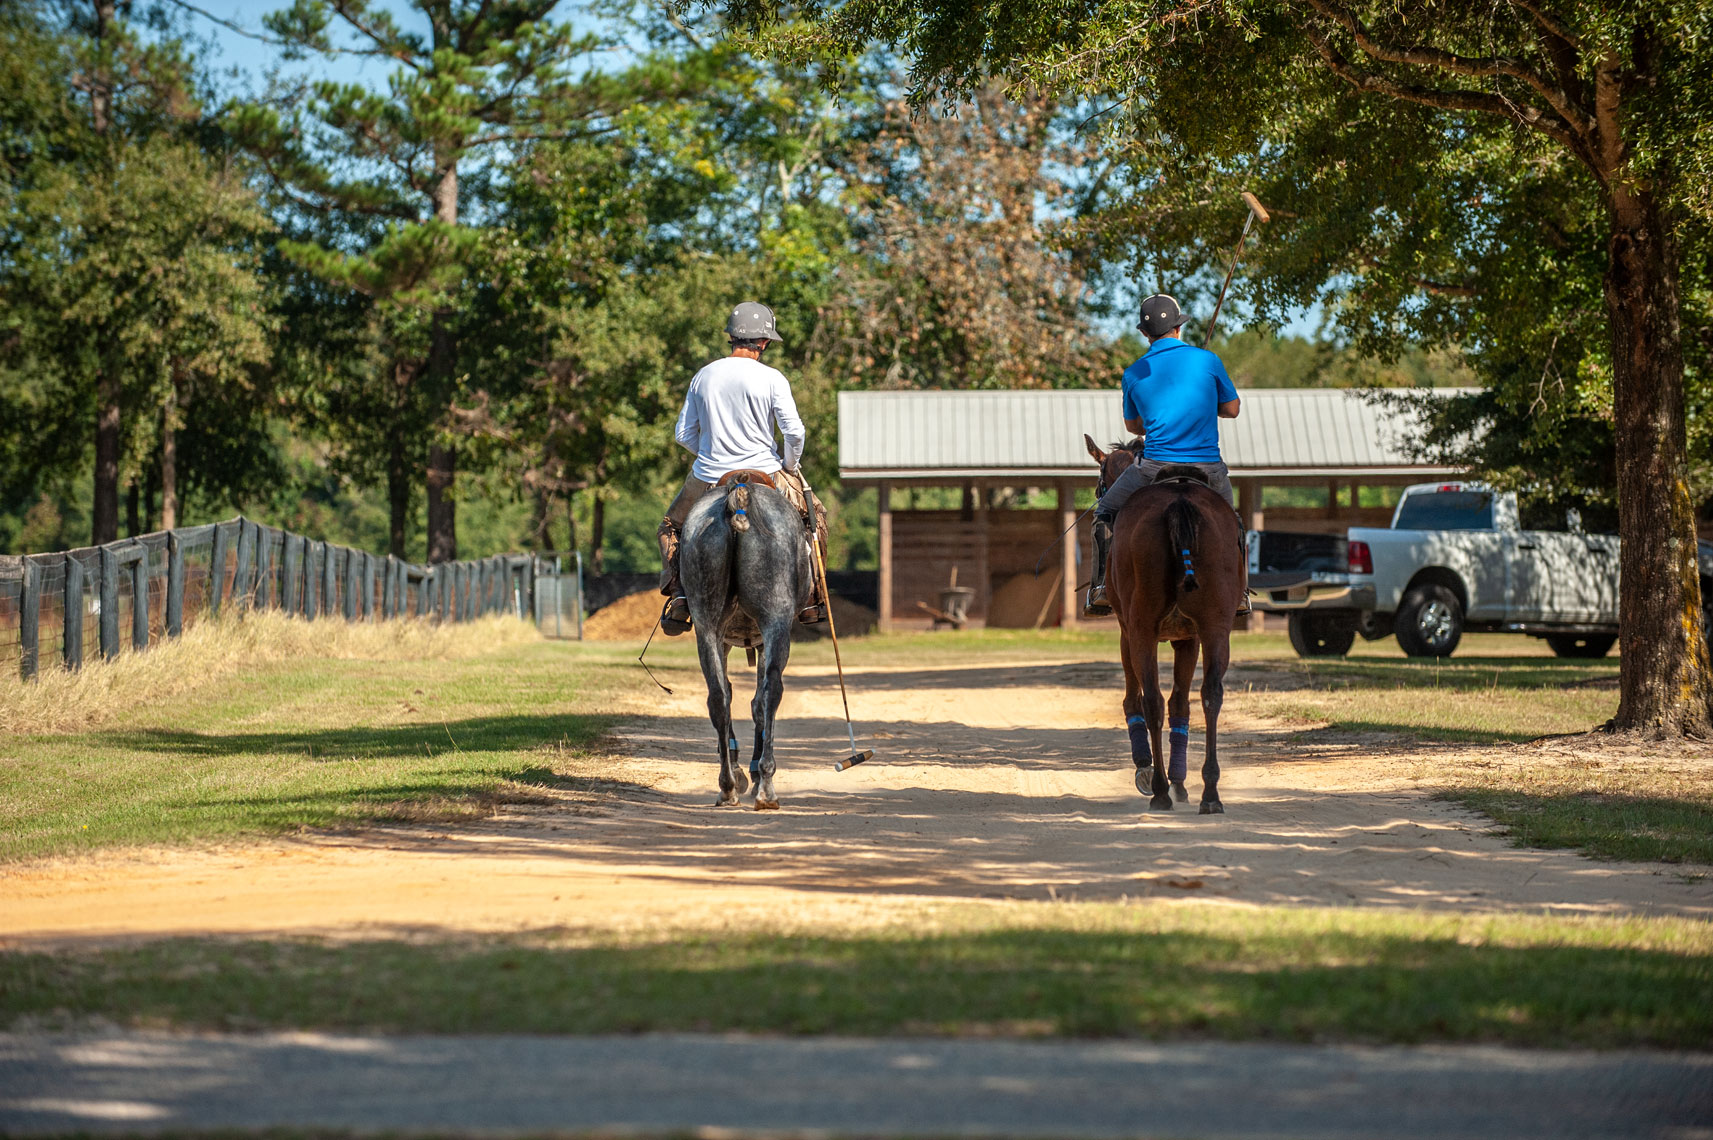 Ten Goal American Polo player Adam Snow and a friend head back to the barn after playing polo.